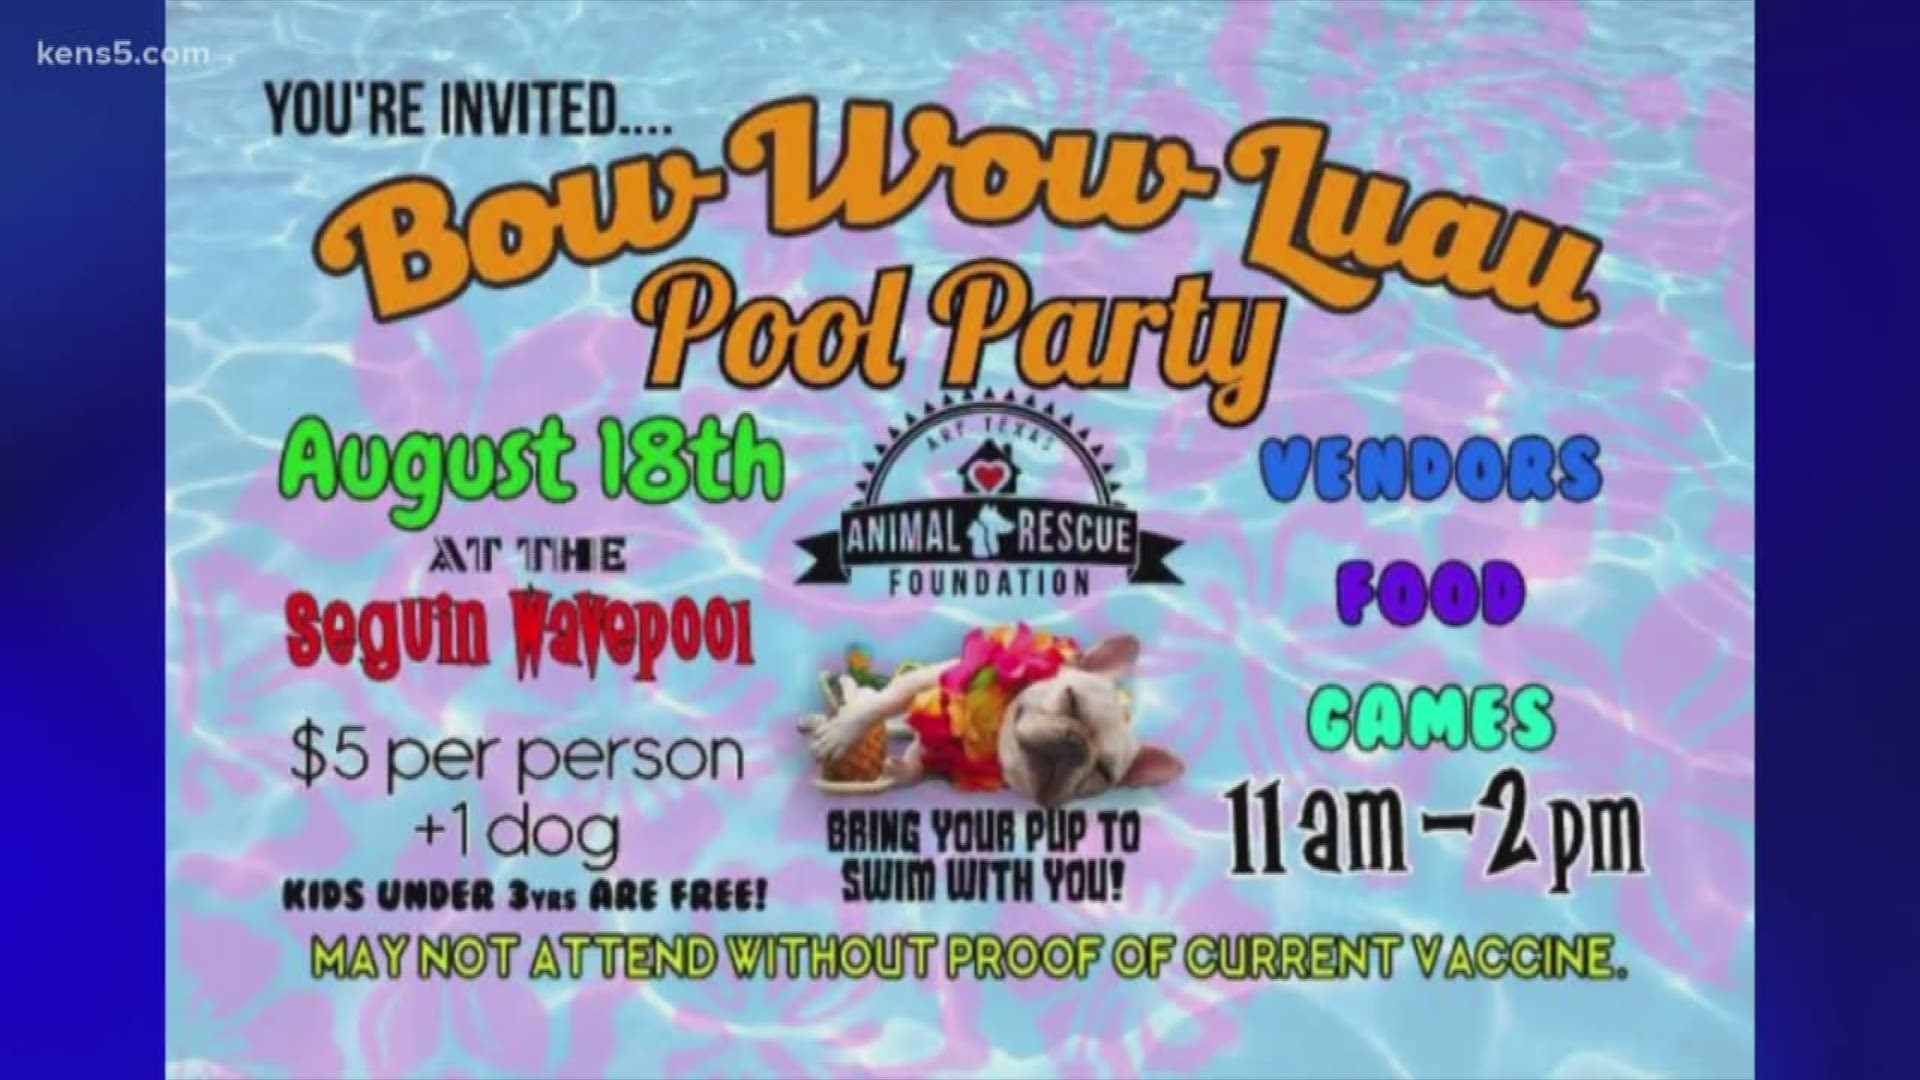 The Bow Wow Luau pool party is next Sunday, August 18, from 11 am to 2 pm, at the Seguin wave pool. You can bring your pup to swim with you! Just make sure you bring proof of current vaccinations.